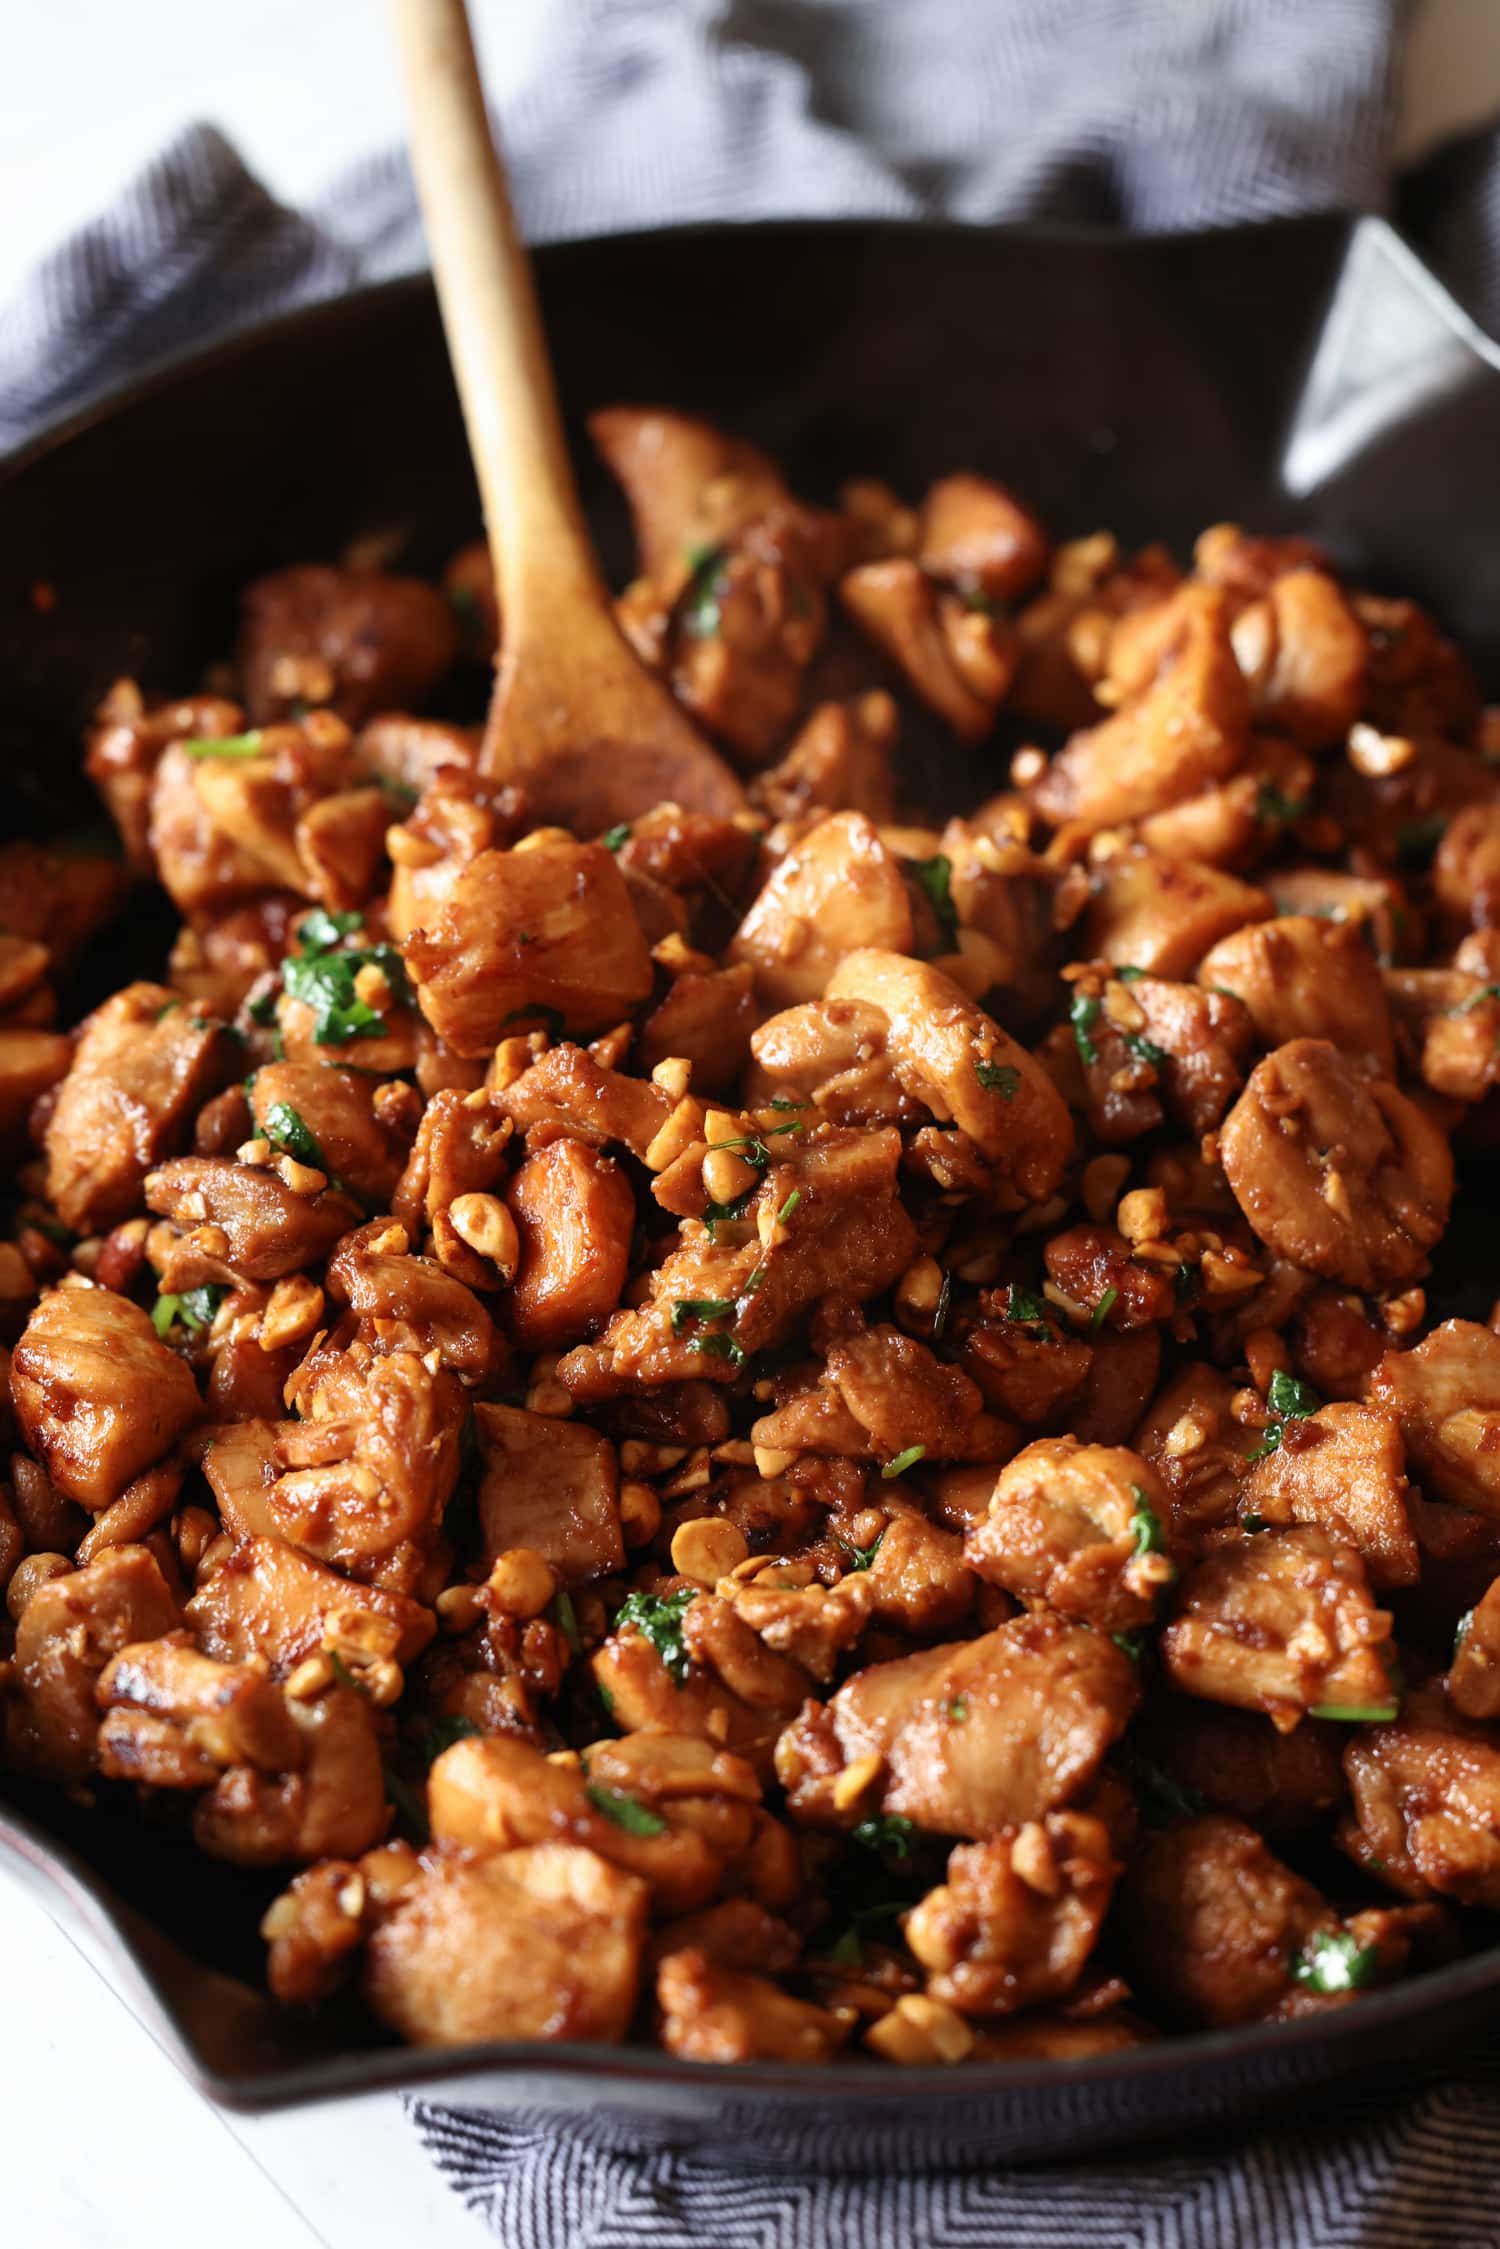 Ginger chicken is stirred with a wooden spoon as it cooks in a cast iron skillet.